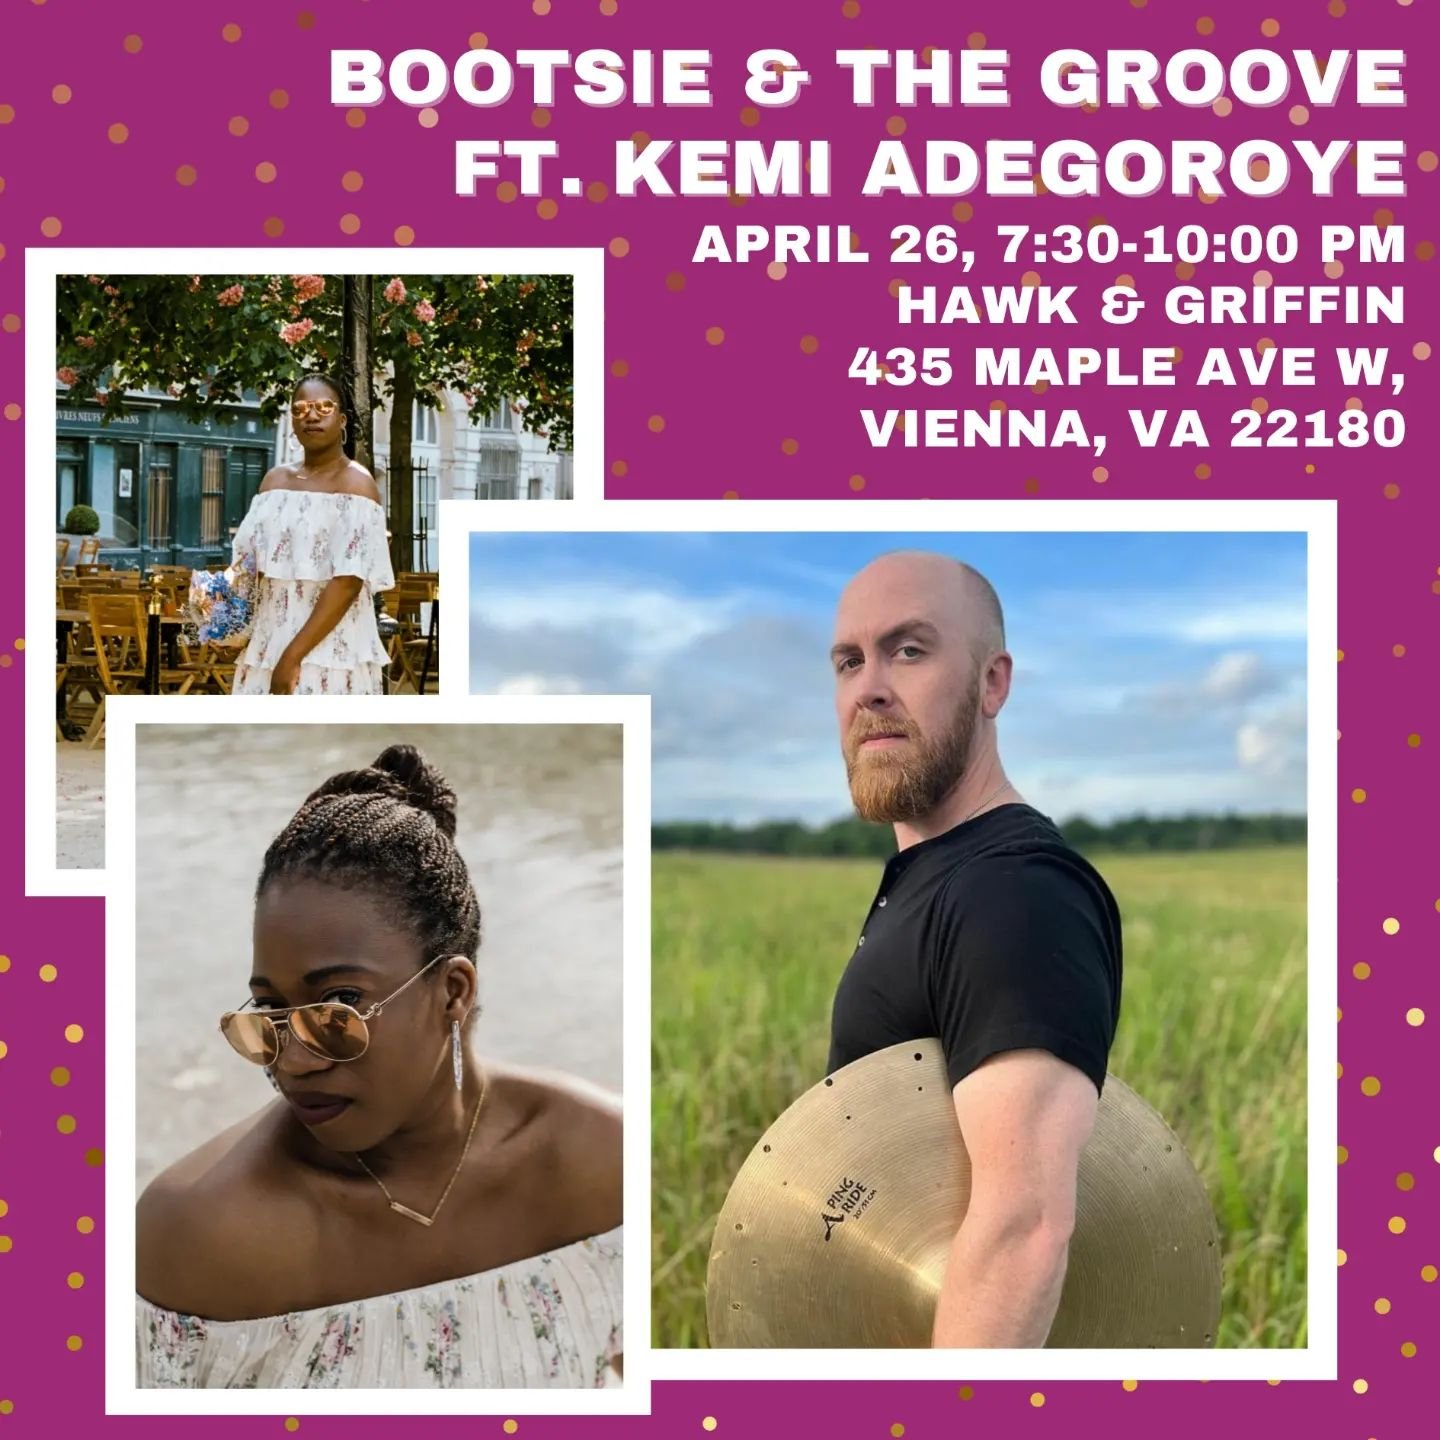 My birthday wish this month is that you join us at @hawkandgriffin on 4/26 for my belated birthday jam! There'll be music, food, stellar drinks, and the best of vibes!!

Come through and chill with me, @bootsieandthegroove, @chrishonmusic, and @the_m